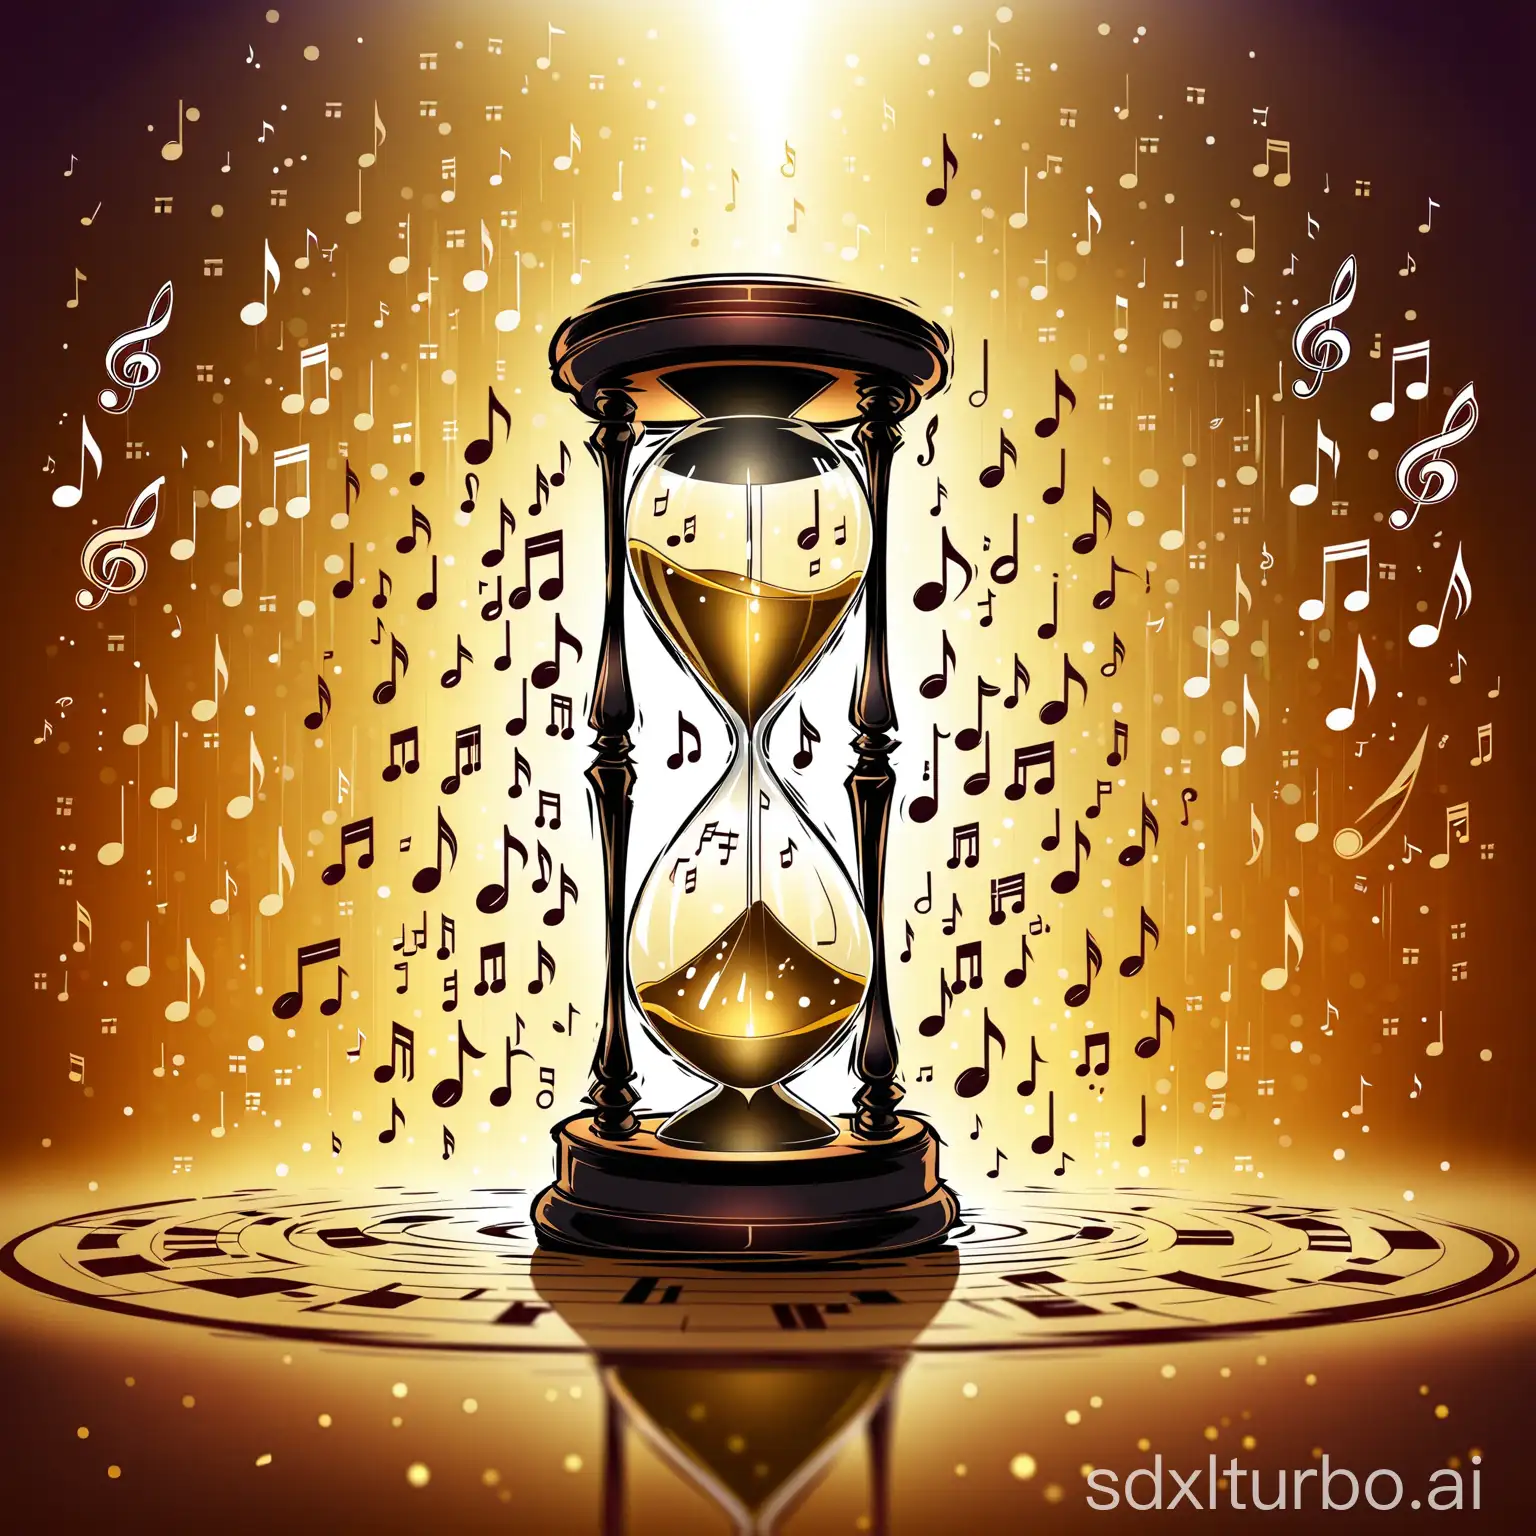 Many musical symbols dance around the hourglass, very historical feeling.